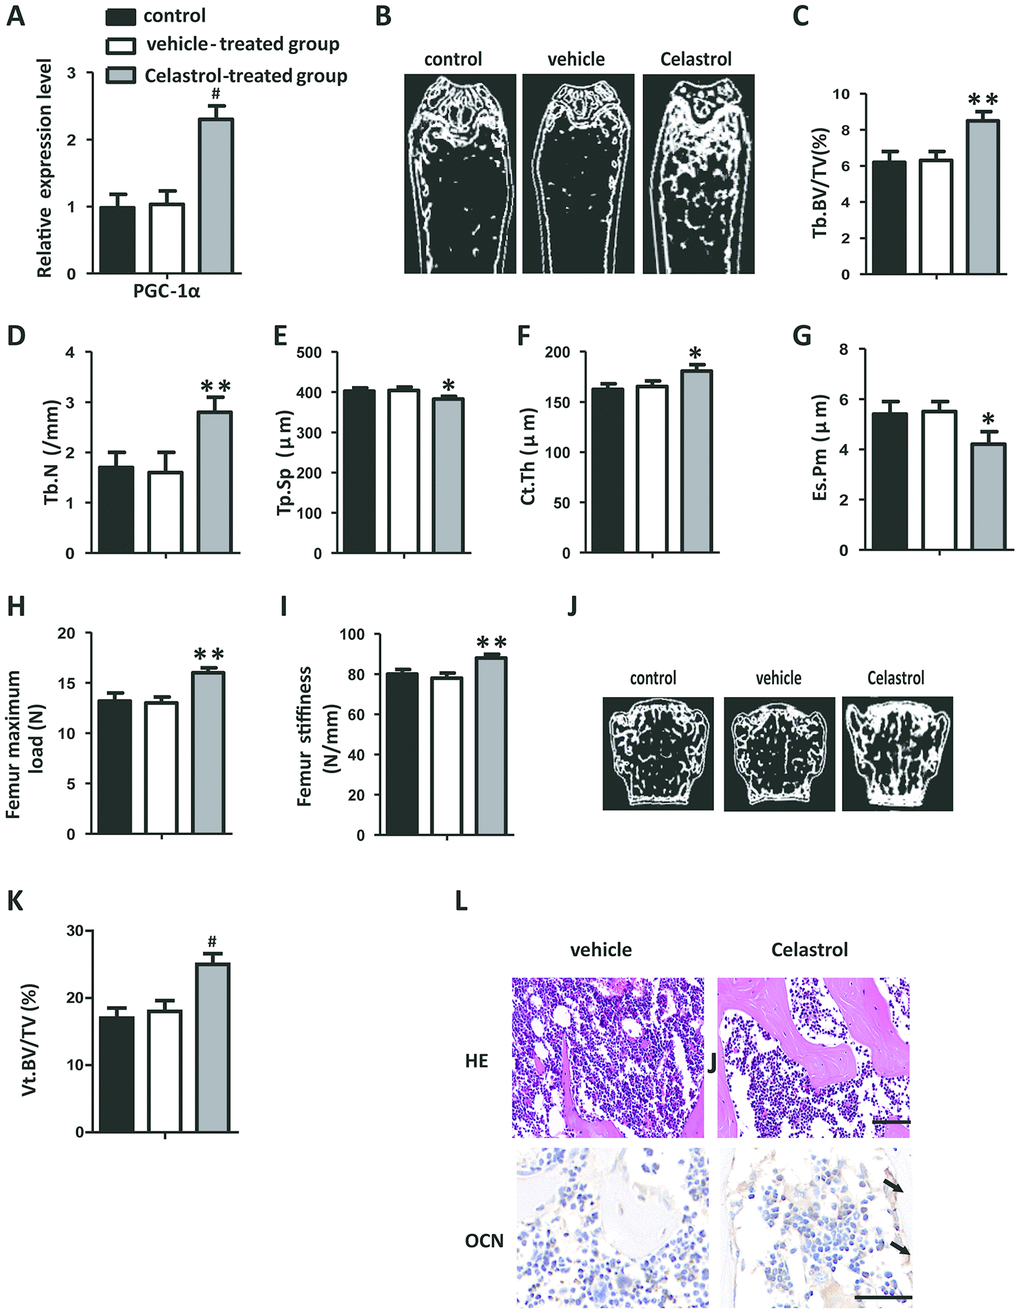 Administration of Celastrol alleviated bone loss and MAT accumulation in aged mice. (A) mRNA expression level of PGC-1α in the BM-MSCs determined using qRT-PCR (n = 3 per group). (B–G) Representative μCT images (B) and quantitative μCT analysis of trabecular (C–E) and cortical (F, G) bone microarchitecture in the femora of Celastrol-treated mice. n = 6-7 per group. (H–I) Three-point bending measurement of femur maximum load (H) and stiffness (I). n = 5 per group. (J, K) Representative μCT images (J) and quantification of the ratio of bone volume to tissue volume (K) of L4 vertebrae (Vt. BV/TV). n = 6 per group. (L) Representative images of H&E staining (L, top) and osteocalcin immunohistochemical staining (L, bottom). Scale bars: 100 μm. n = 5 per group. Data are presented as mean ± SD. Statistical significance was determined using analysis of variance (one-way ANOVA). #P **P *P 